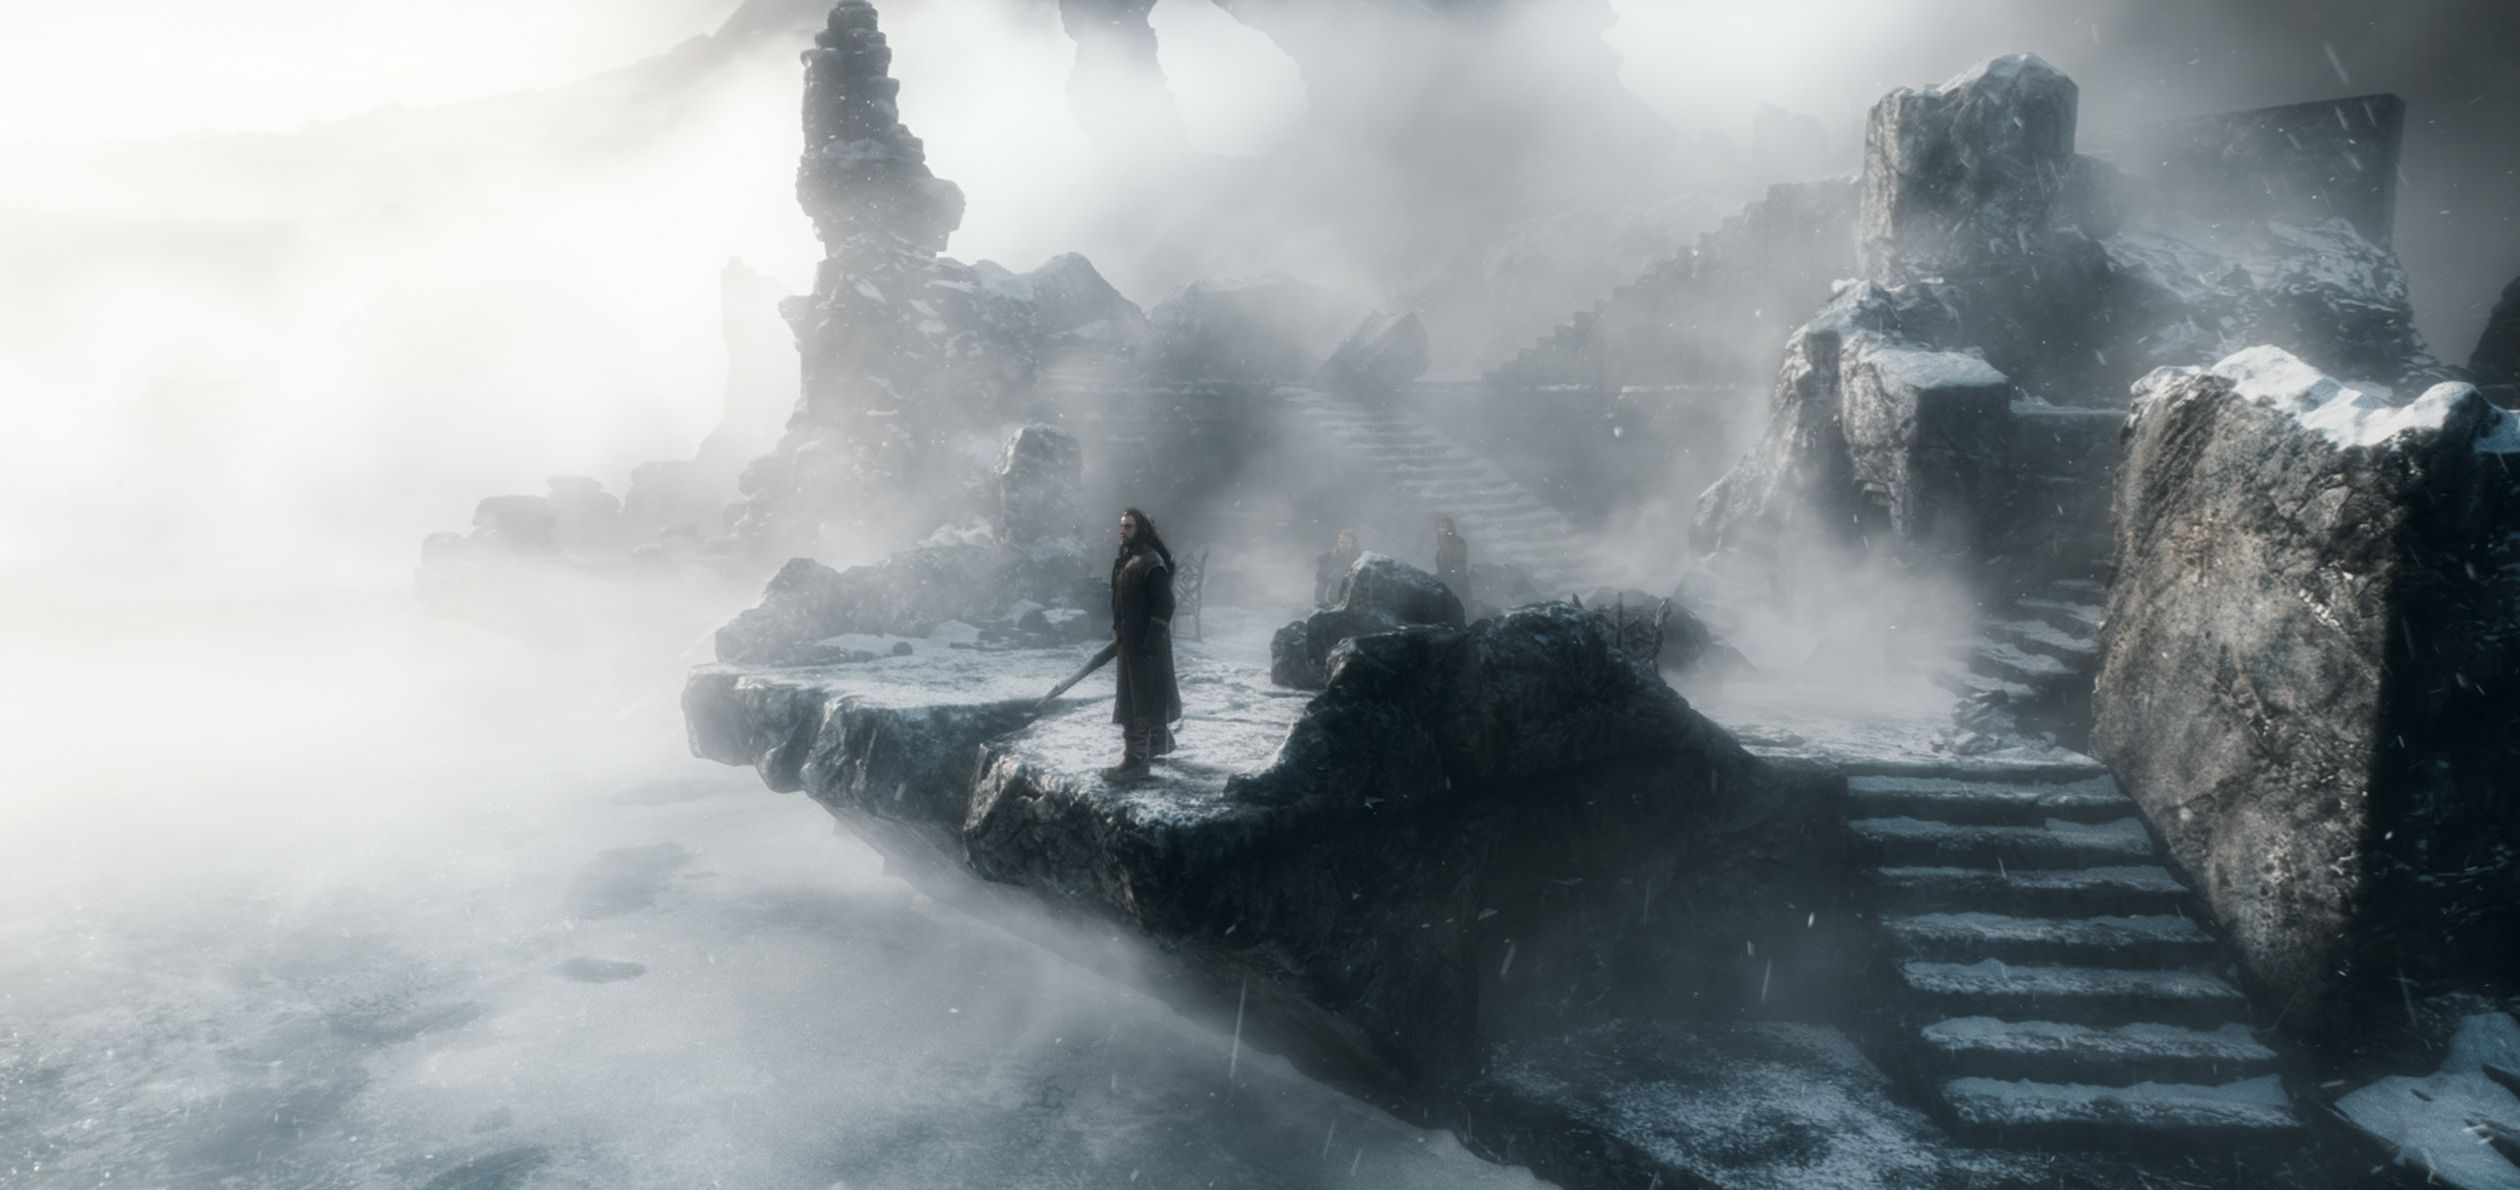 Misty scene in The Battle of the Five Armies